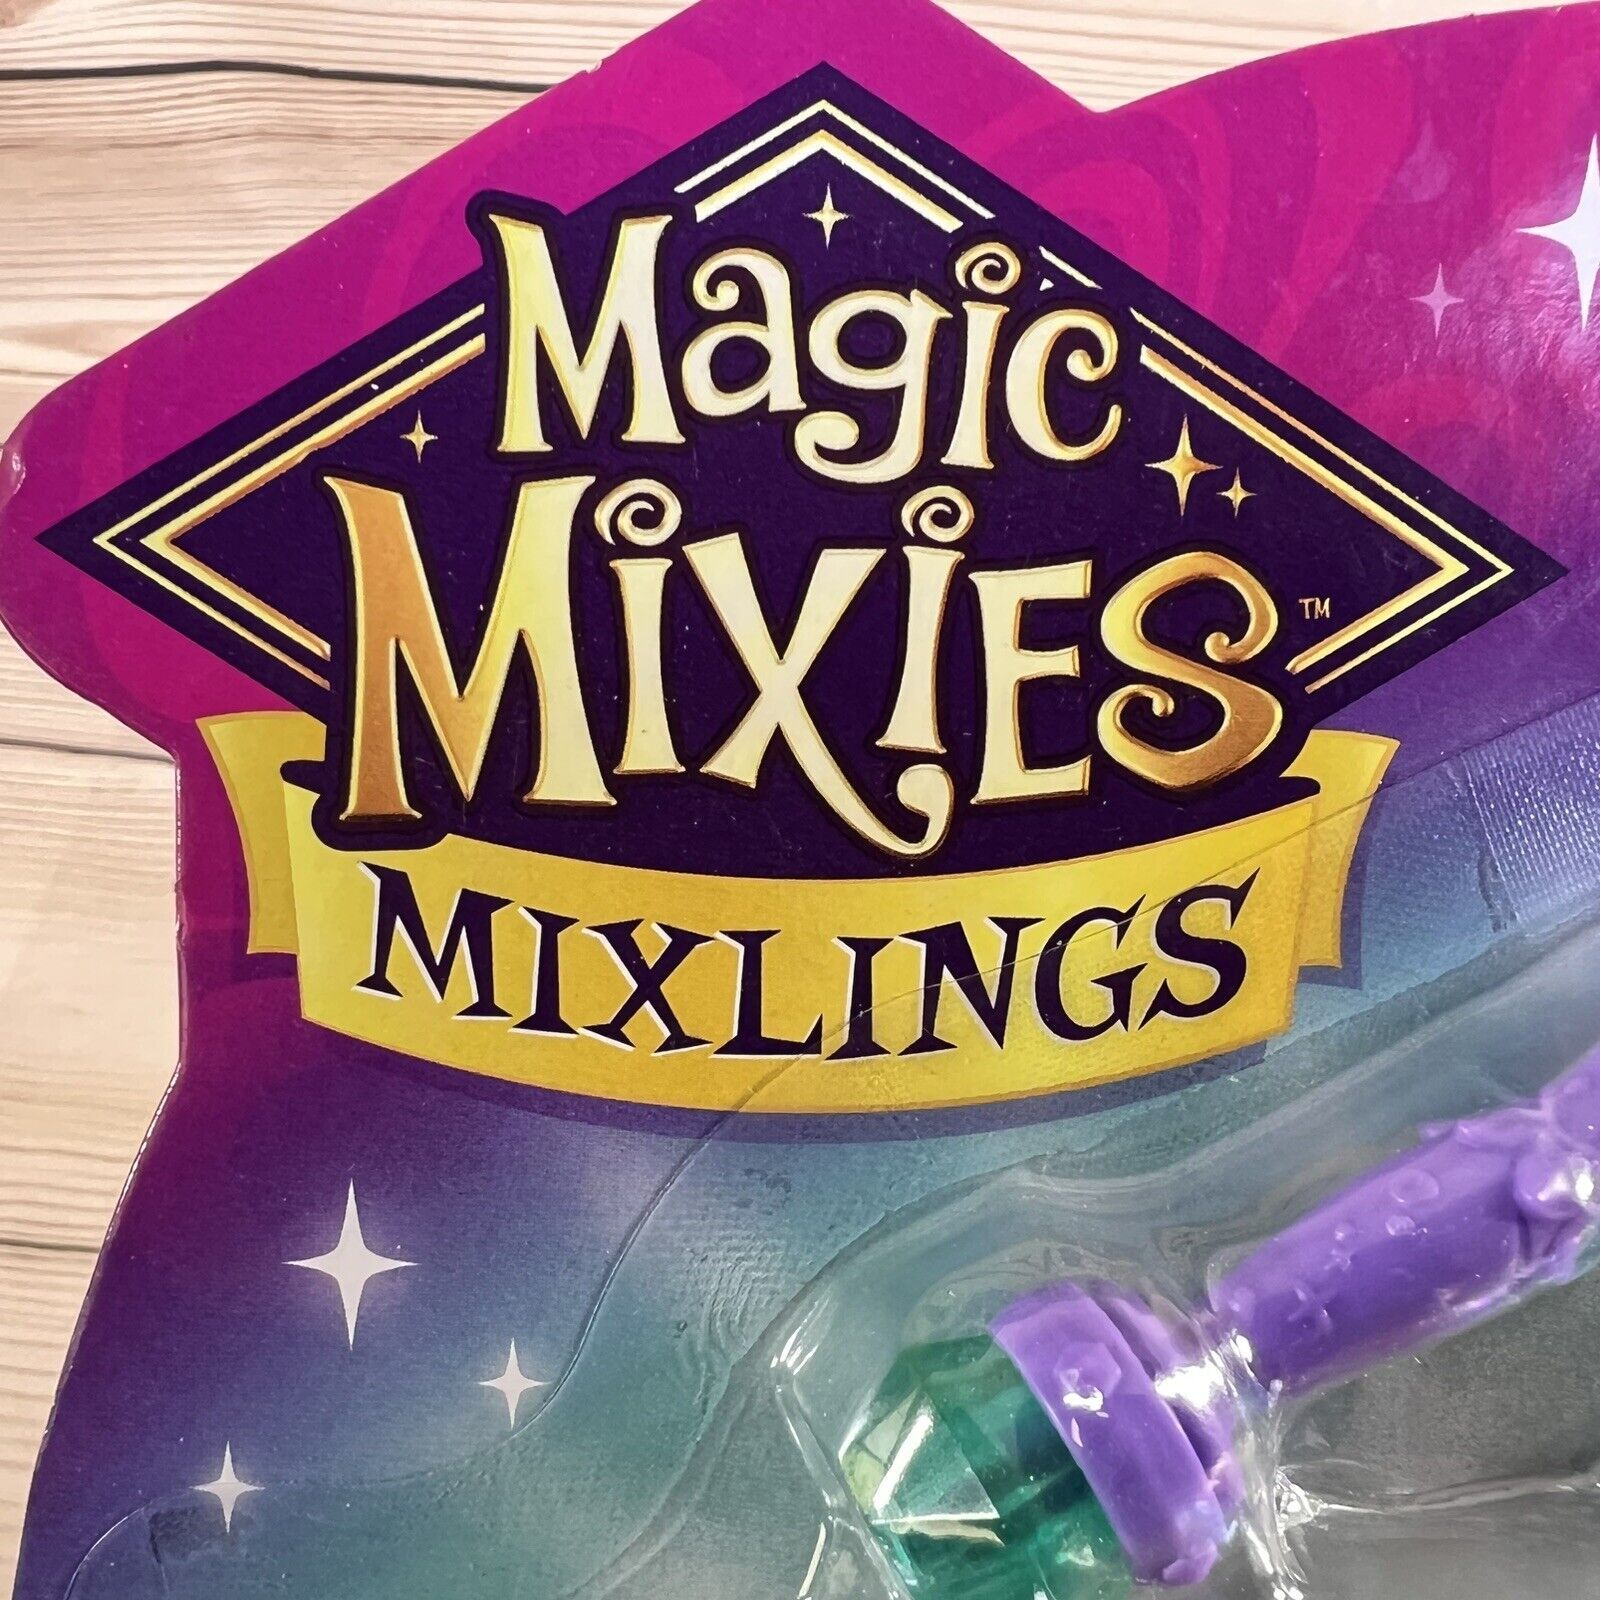 Magic Mixies Mixlings Exclusive Glitter 4 pack 